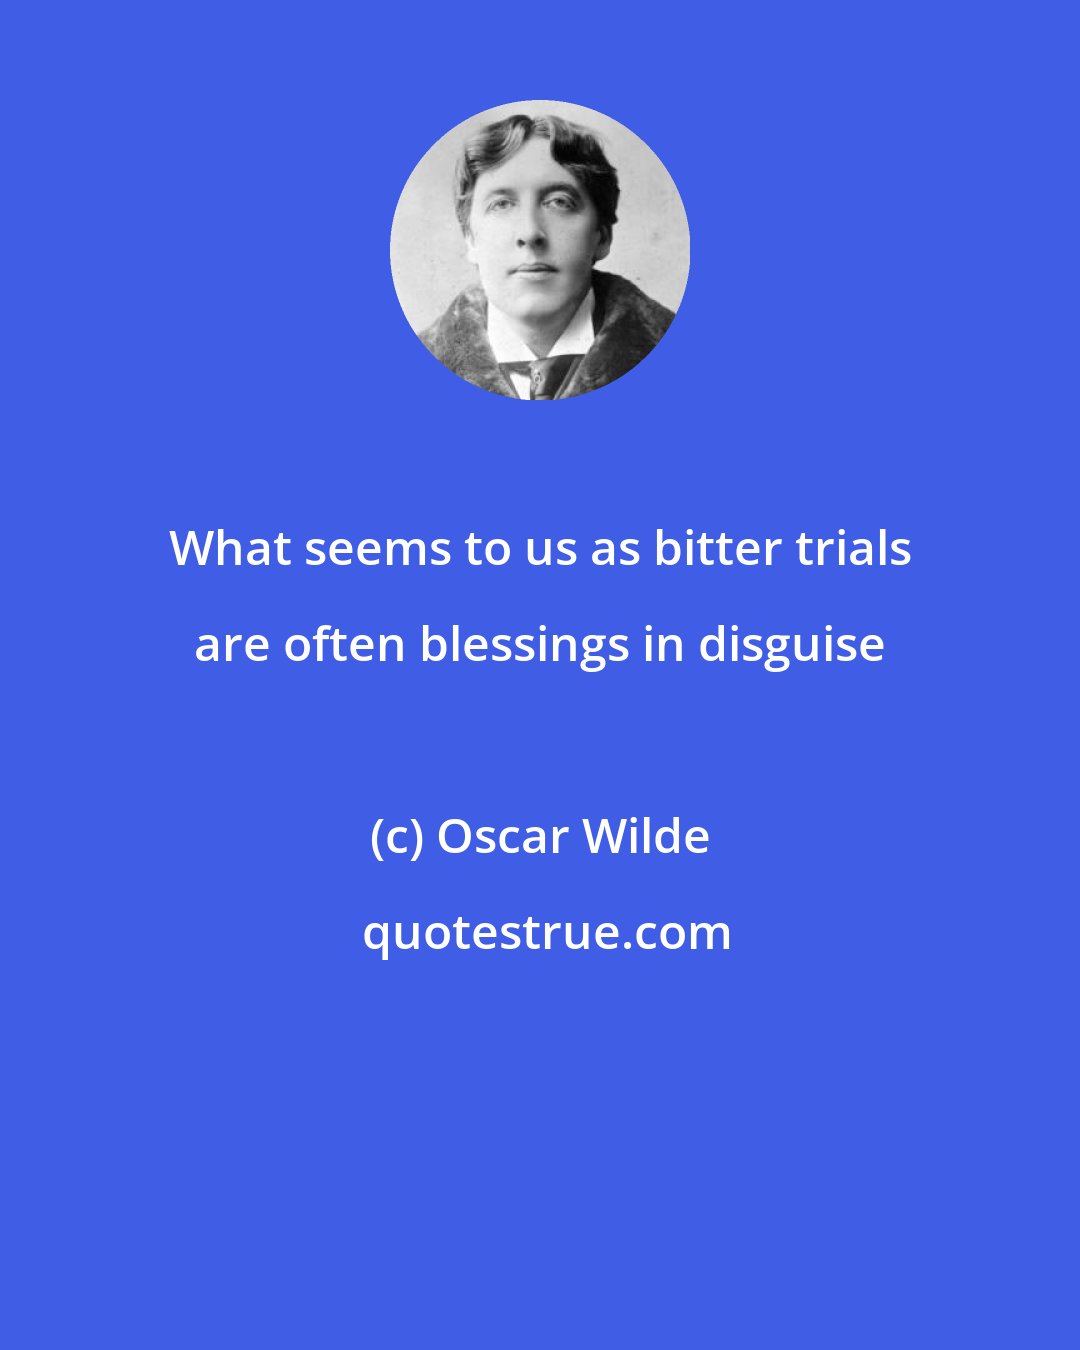 Oscar Wilde: What seems to us as bitter trials are often blessings in disguise